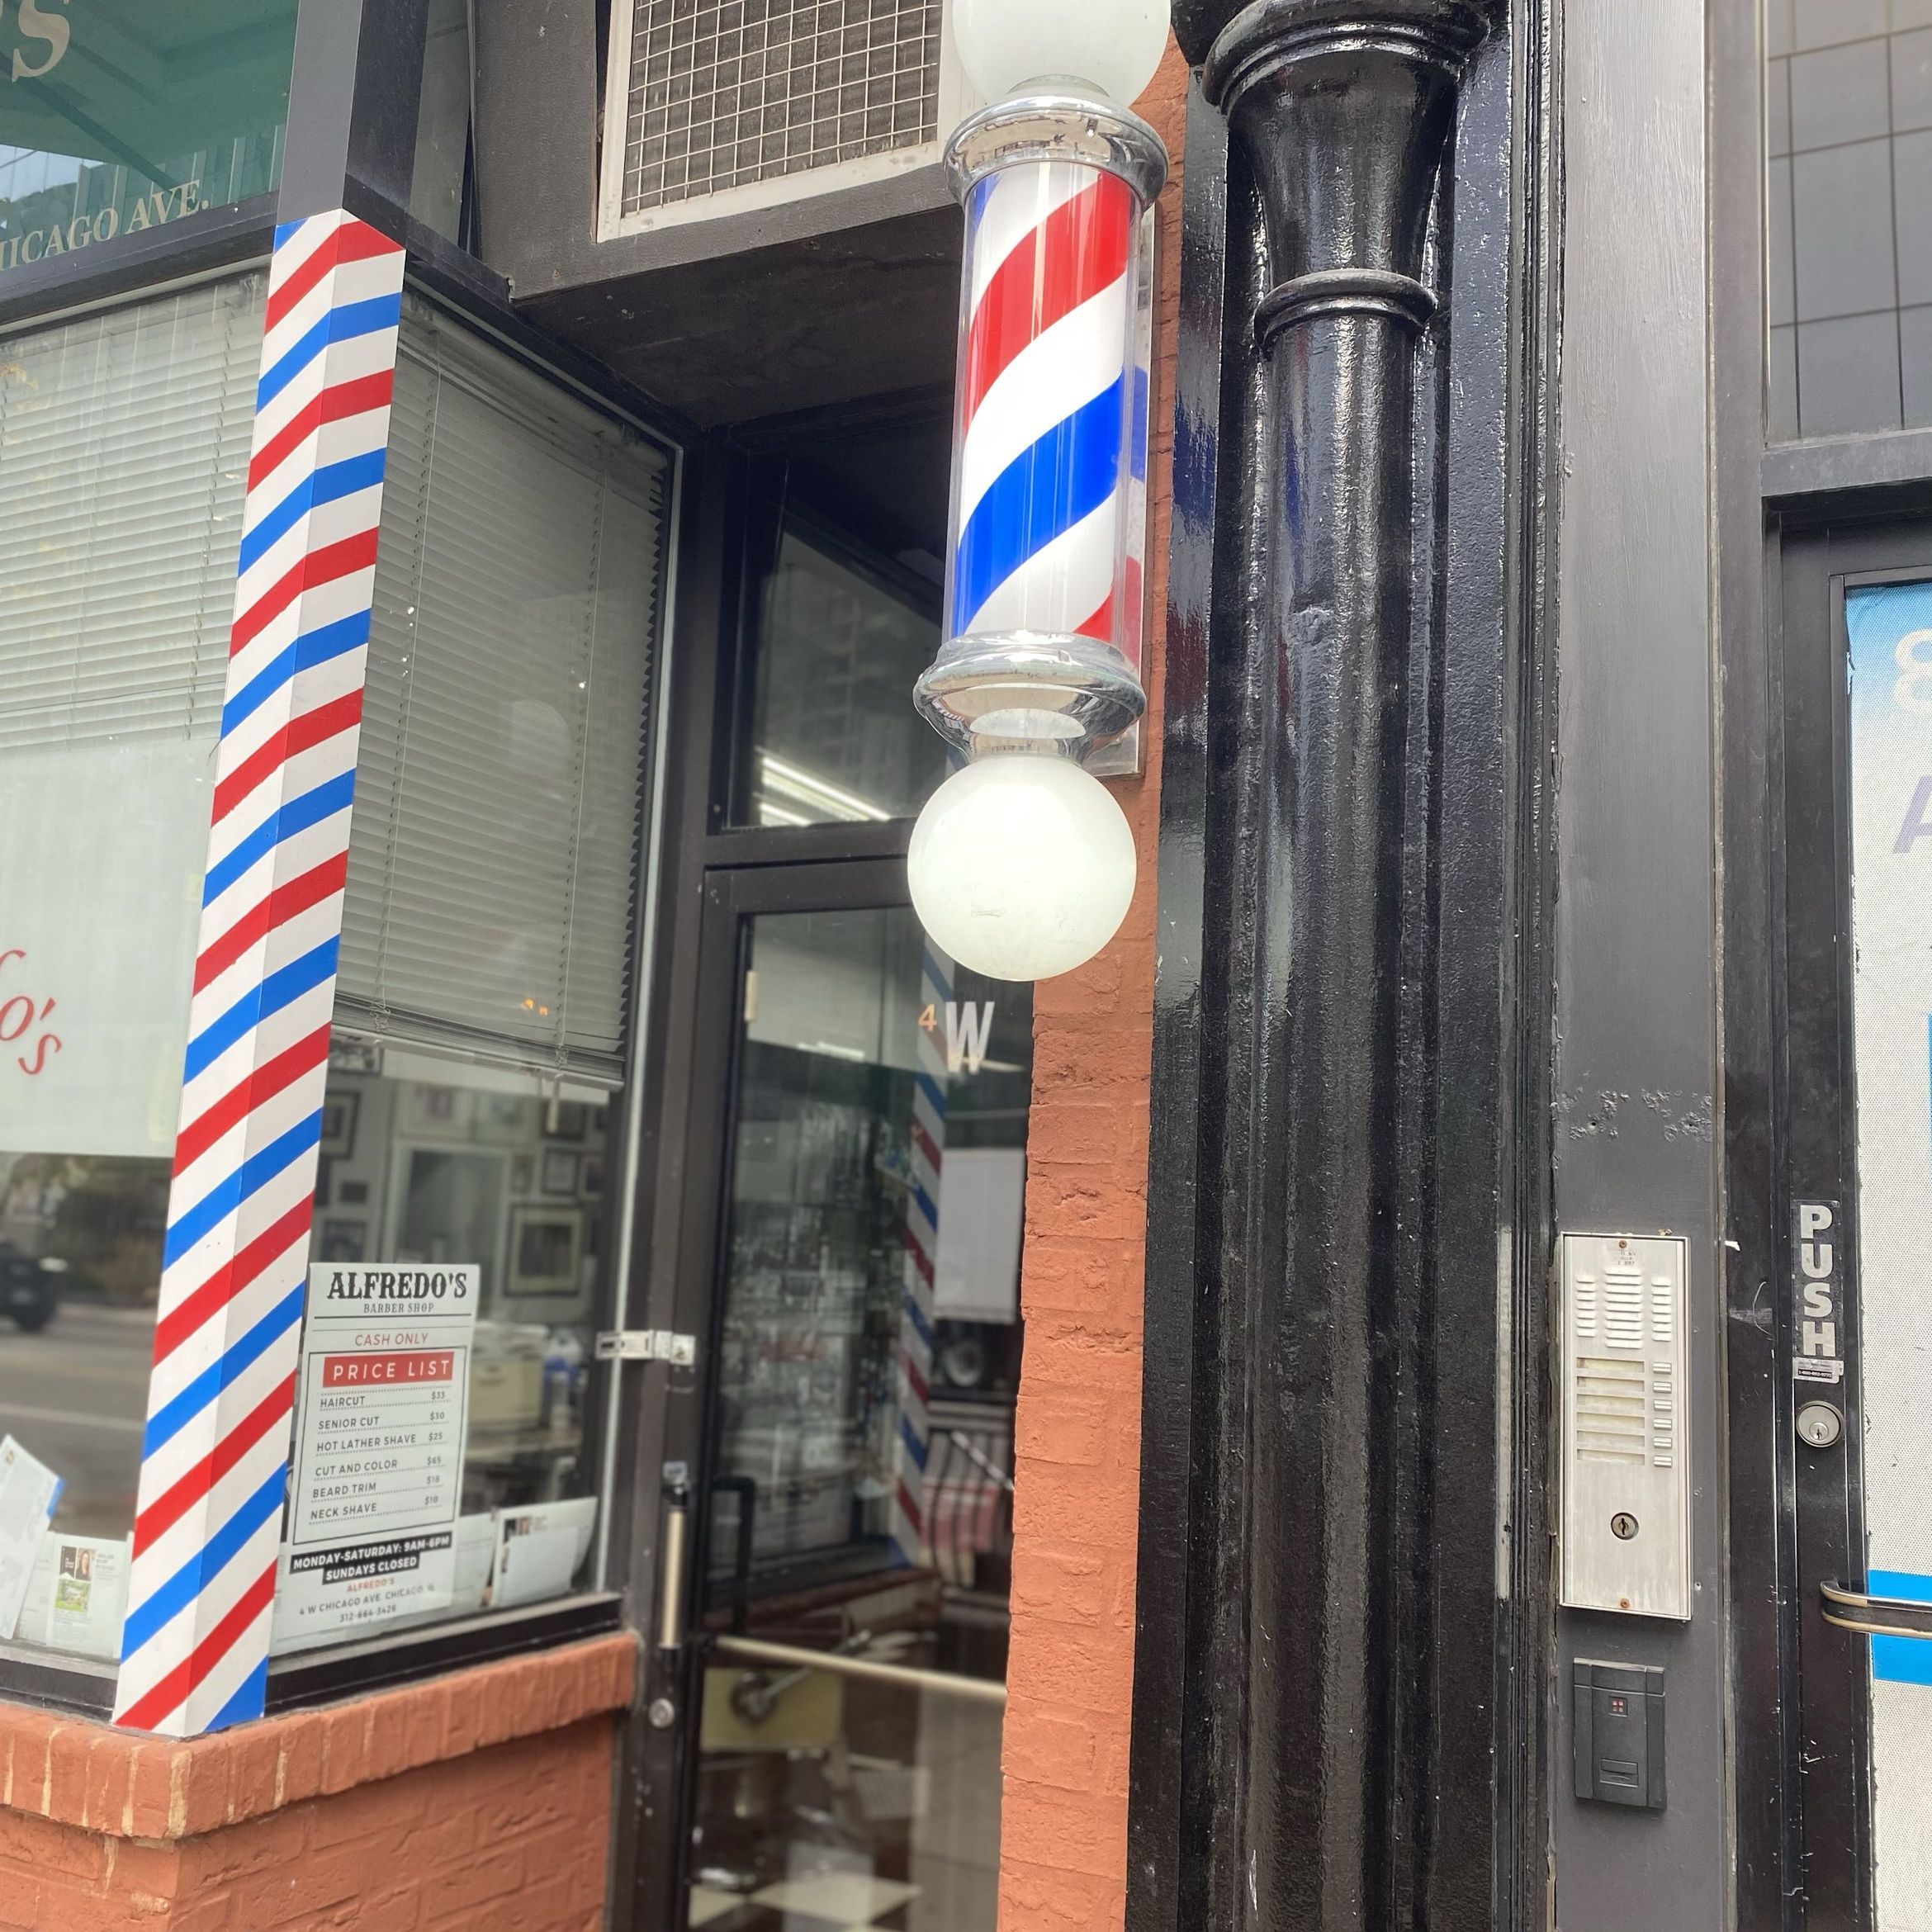 Clint @Alfredos Barbershop, 4 W Chicago Ave, Chicago, 60654